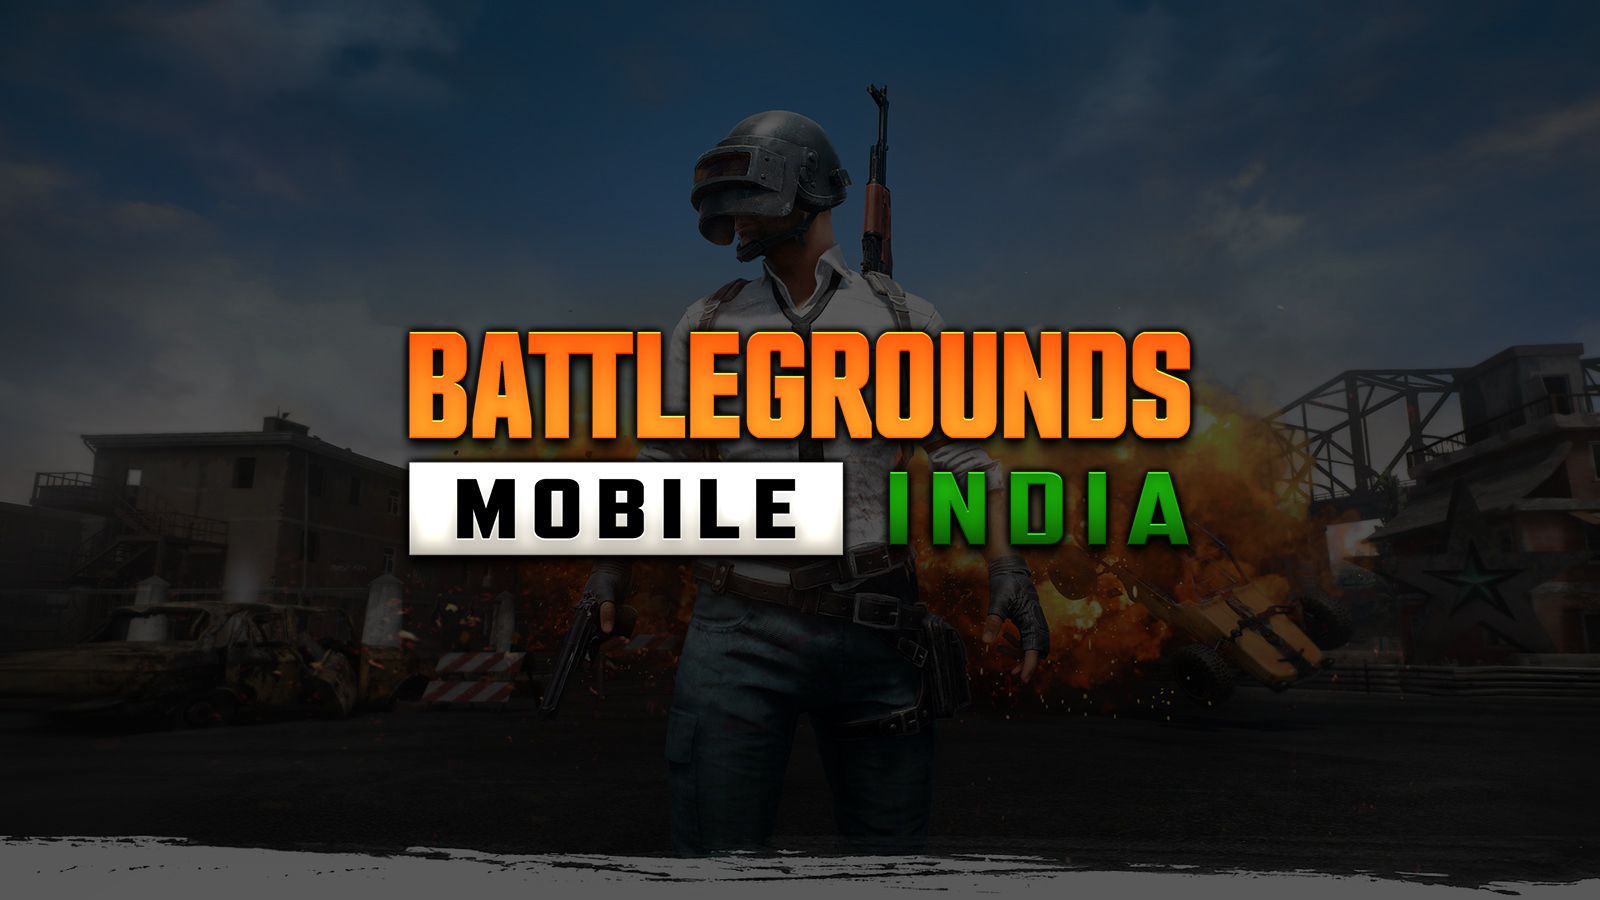 Battlegrounds Mobile India Hd Wallpapers Wallpaper Cave